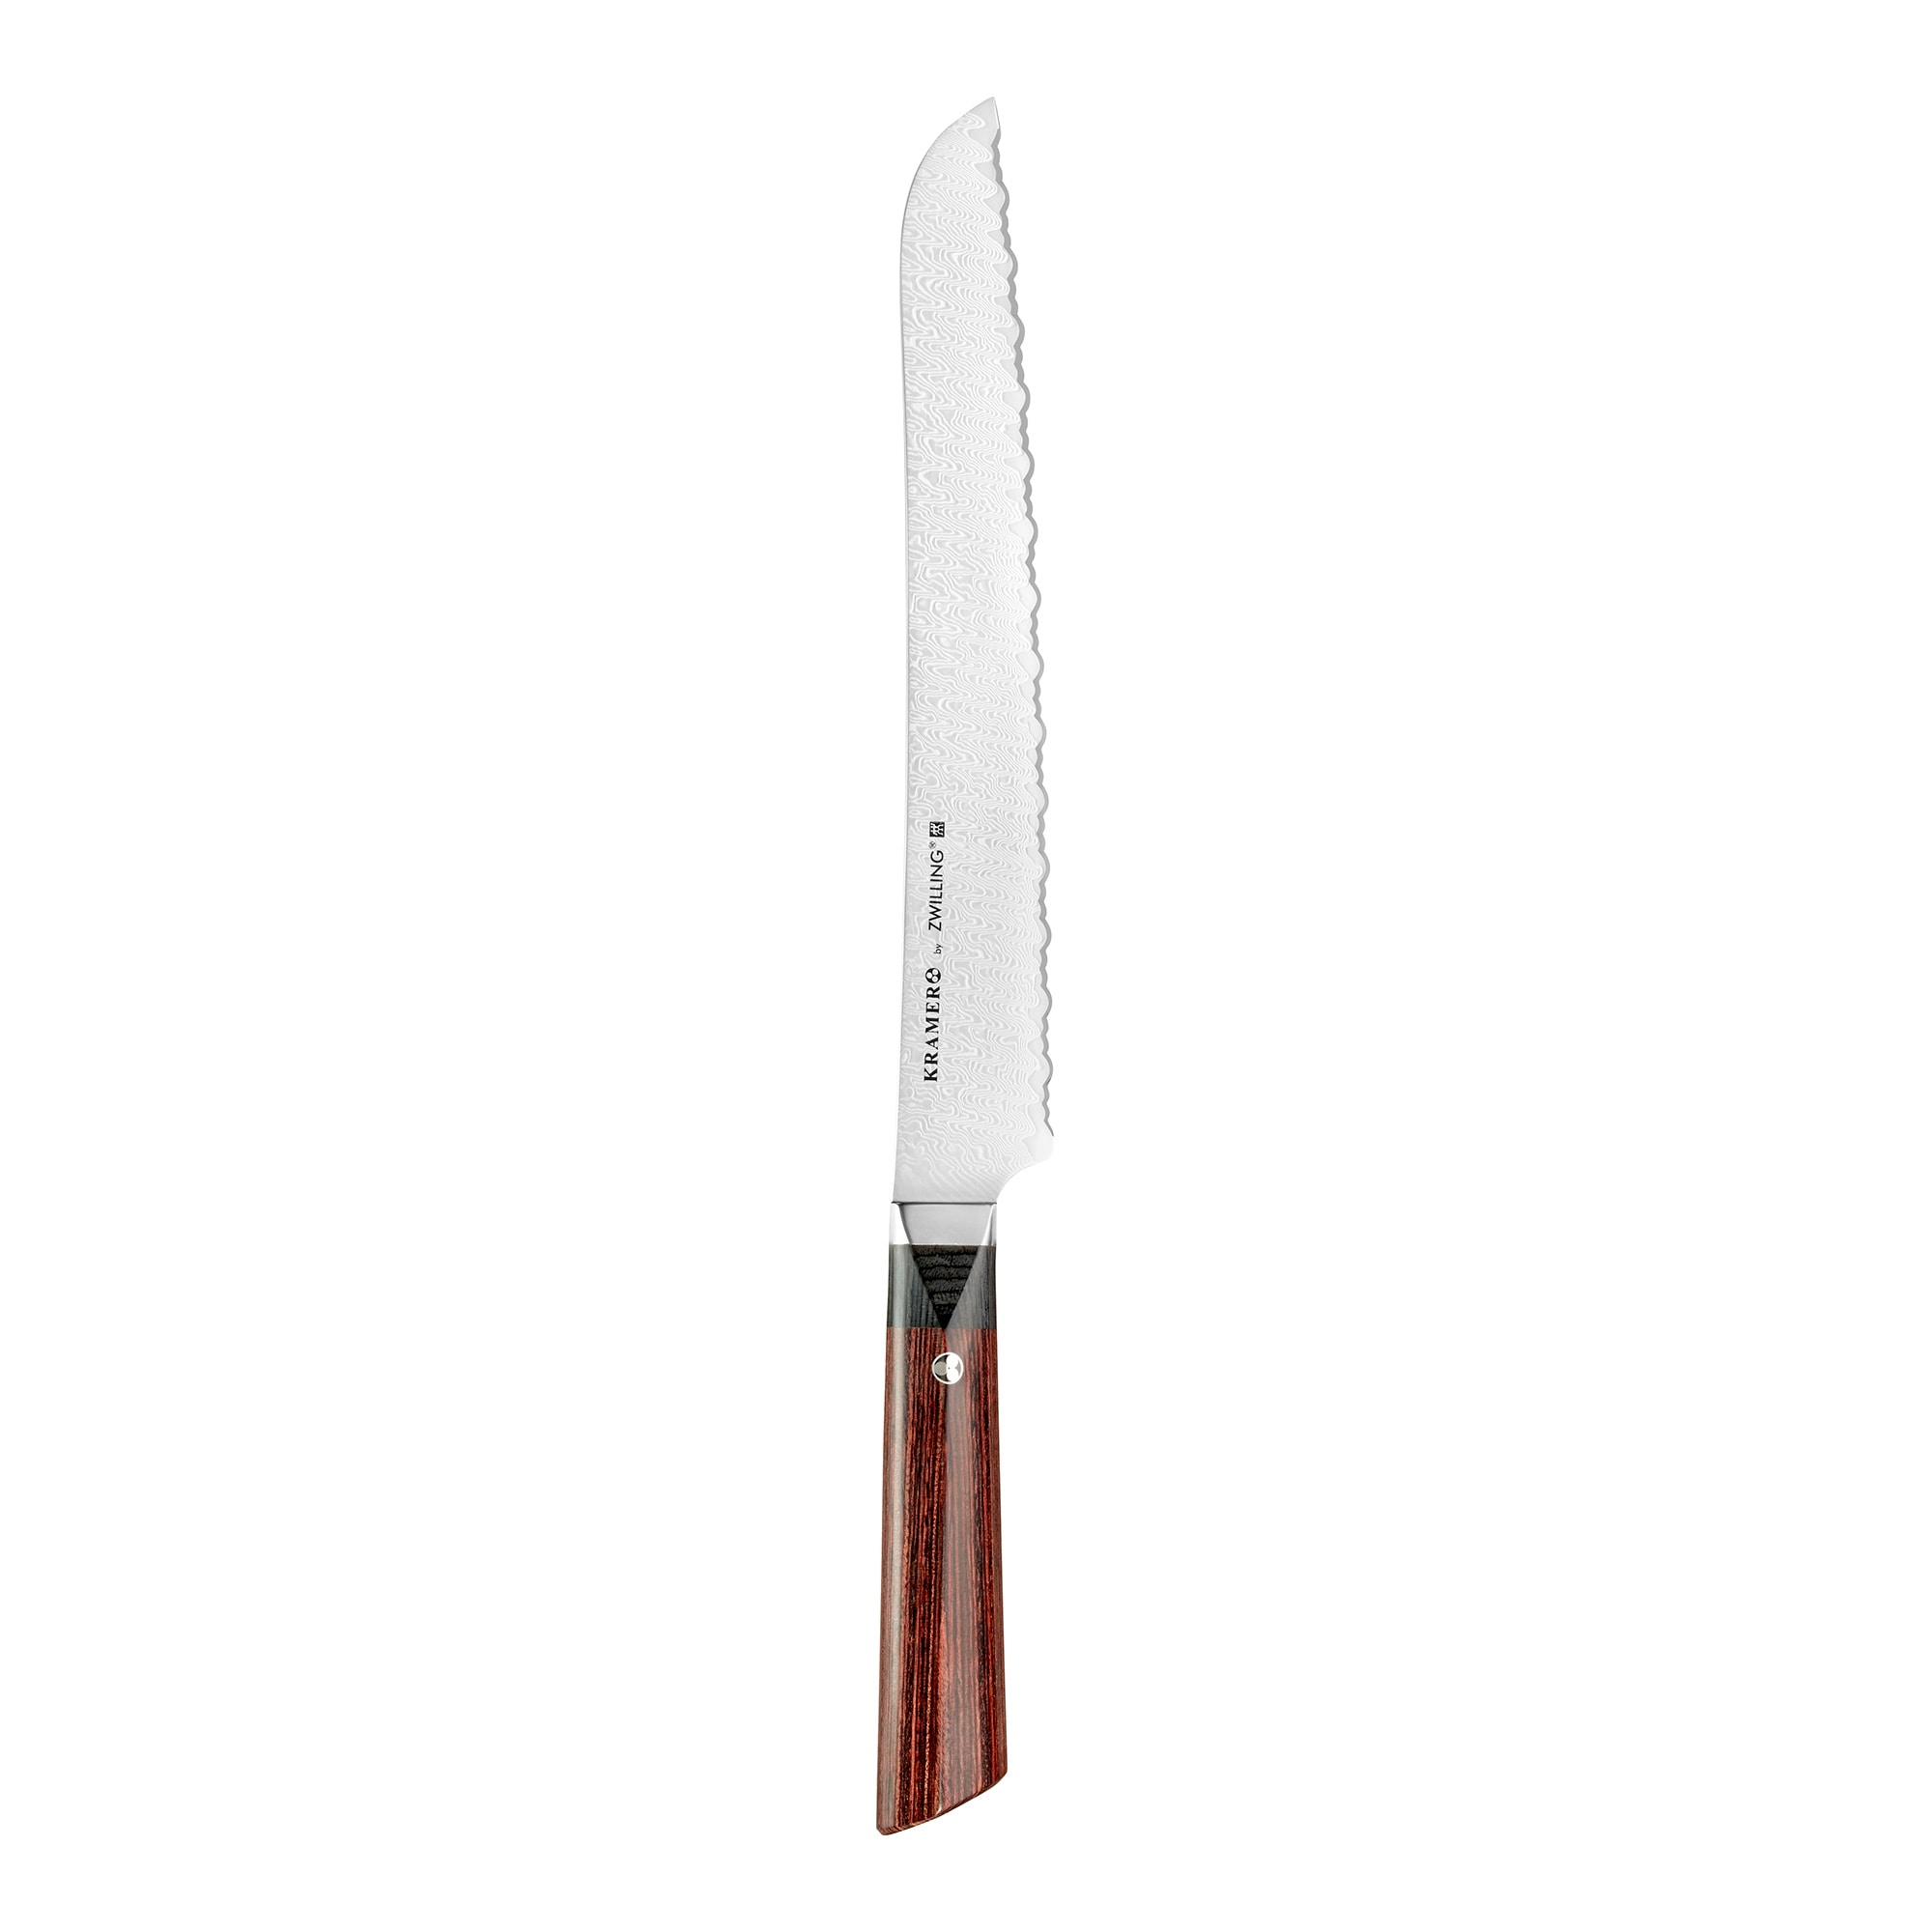 Kramer by Zwilling Carbon 2.0 10-Inch Chef's Knife